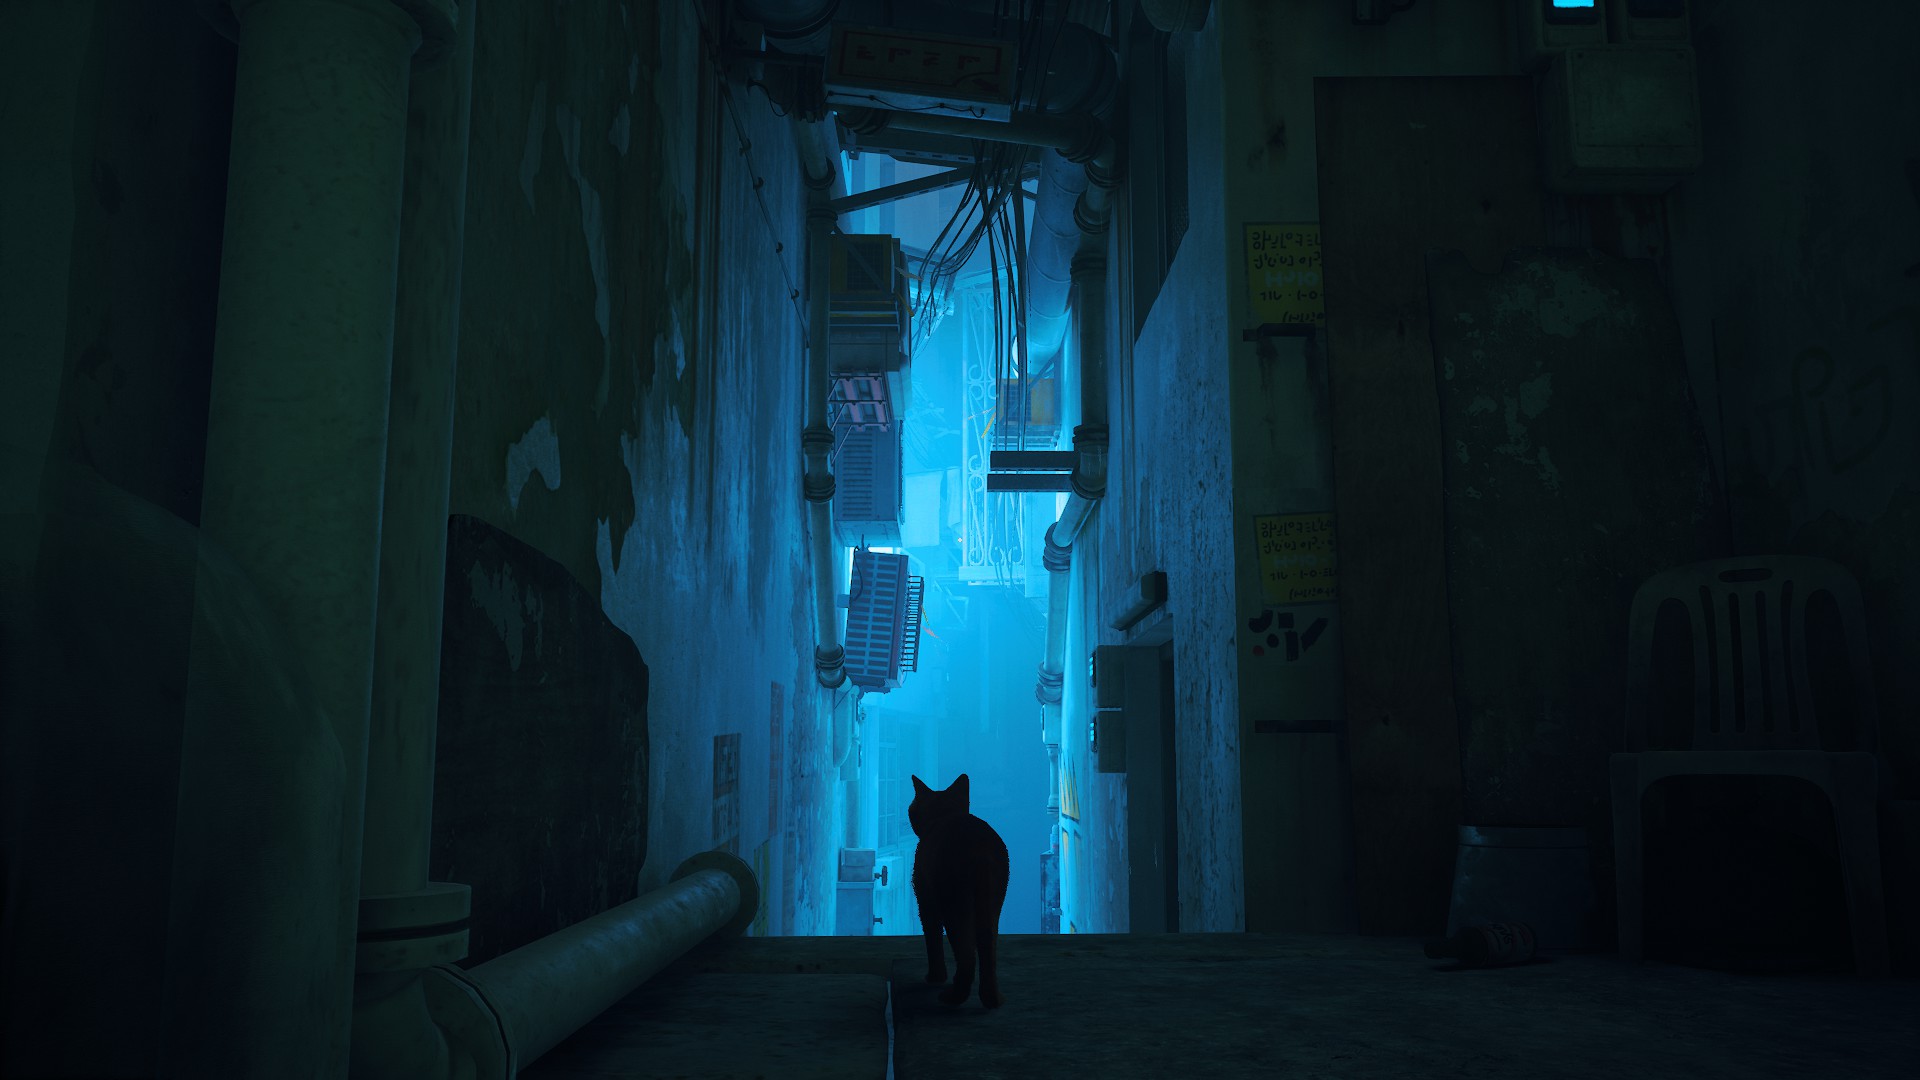 Cat standing in front of a blue-lit alleyway.